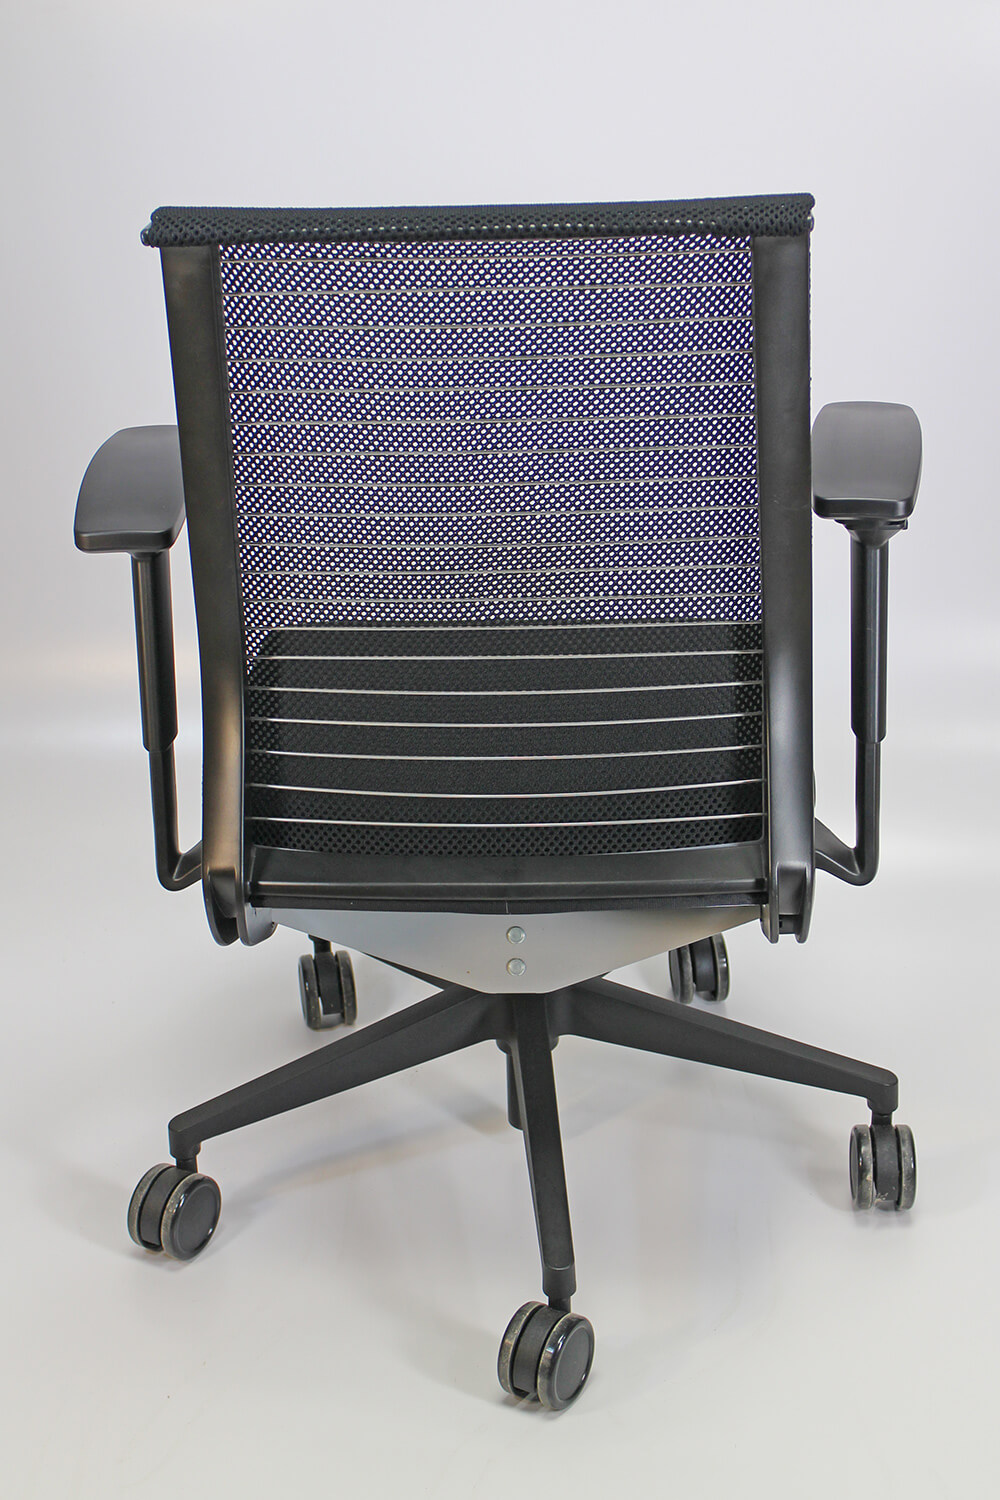 Steelcase think chair back view